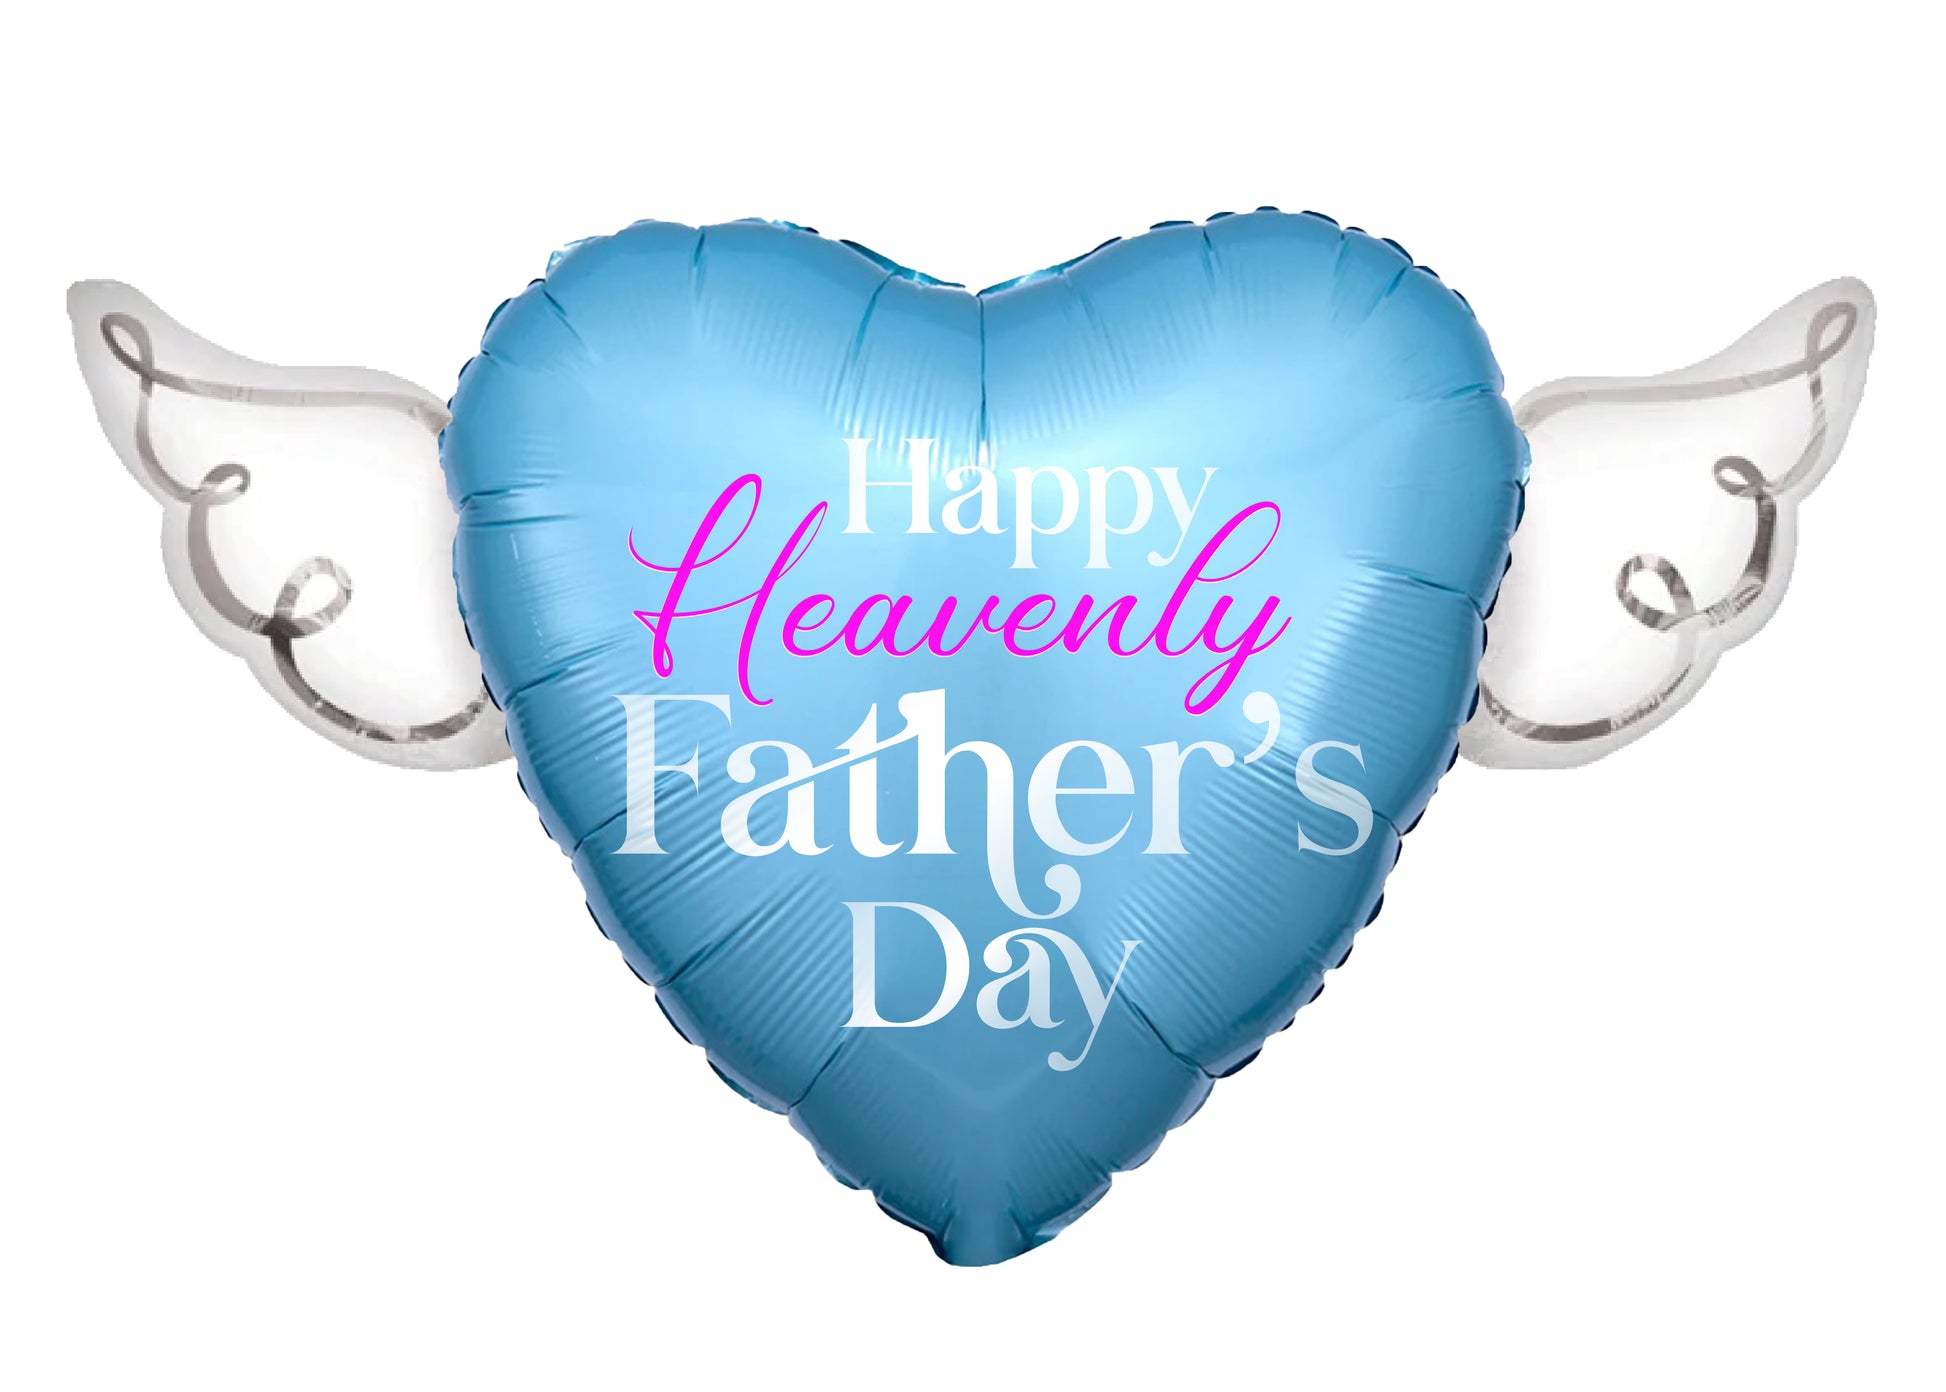 Happy Heavenly Father's Day Balloons Heart Shaped with angel wings (Blue)